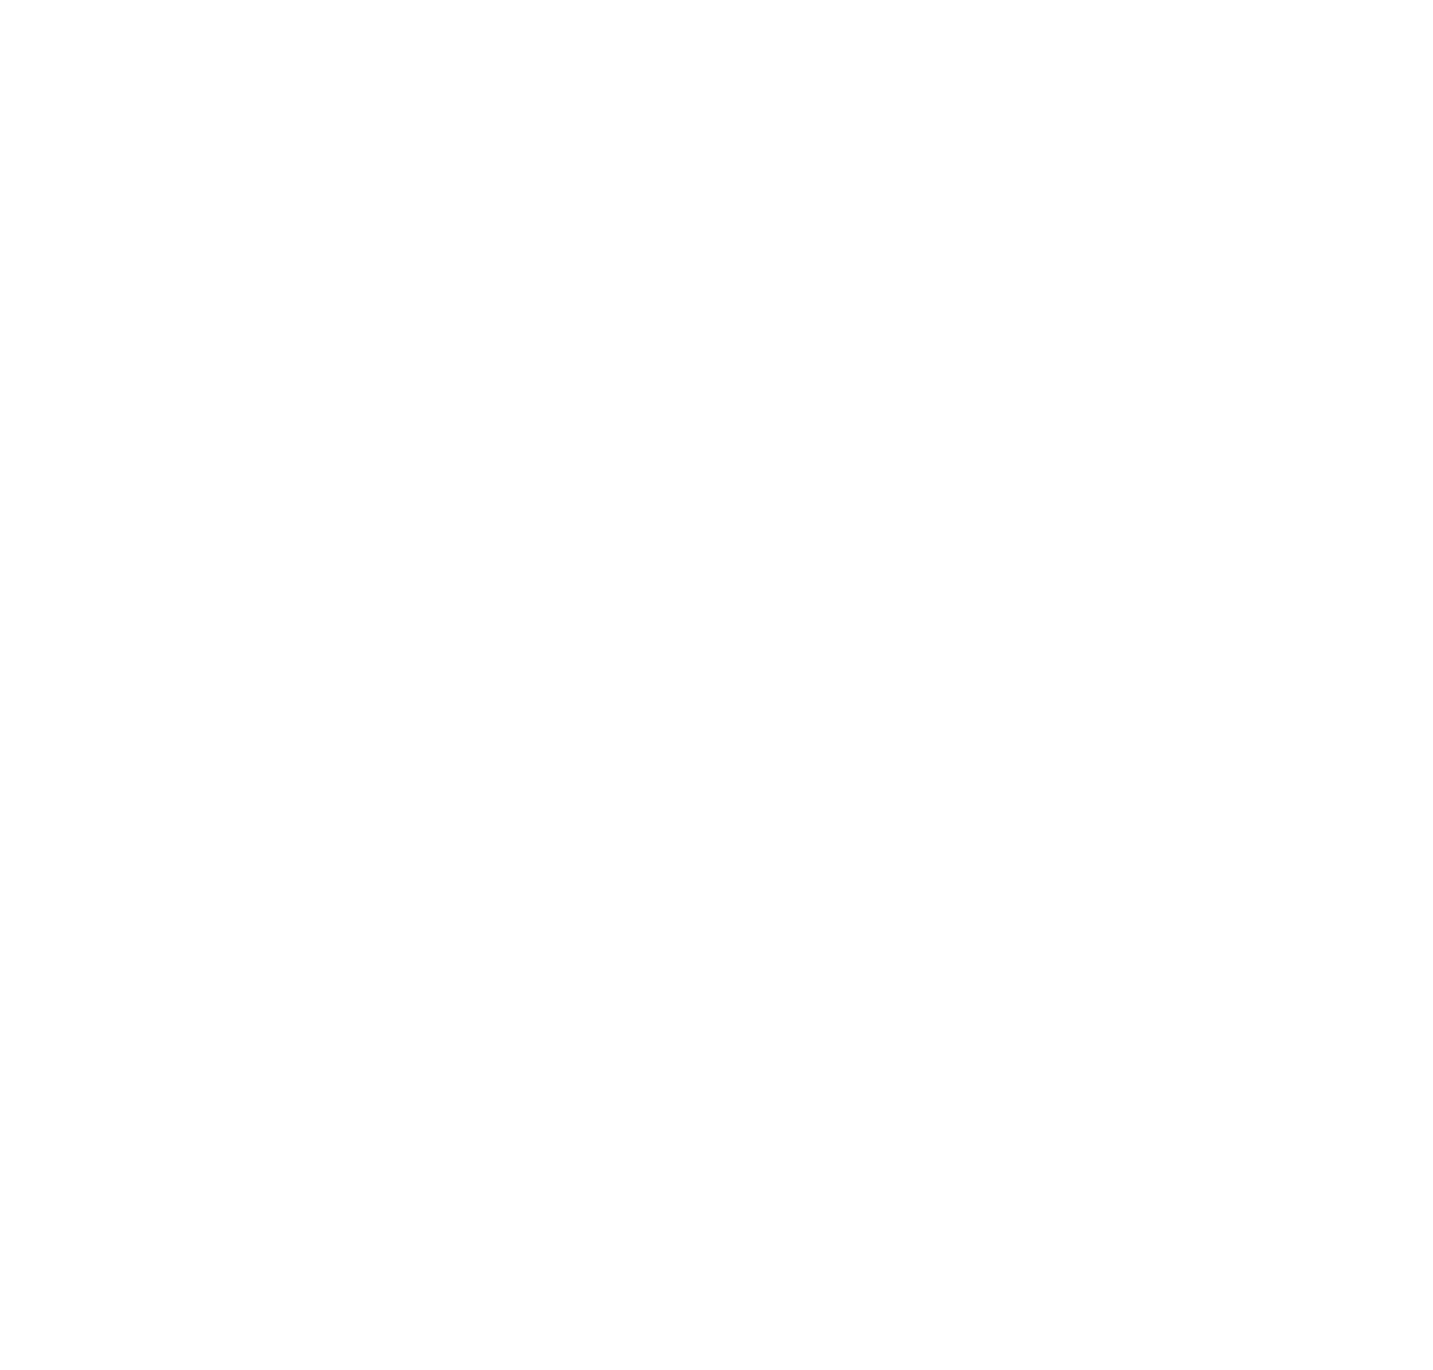 Next Rise Project